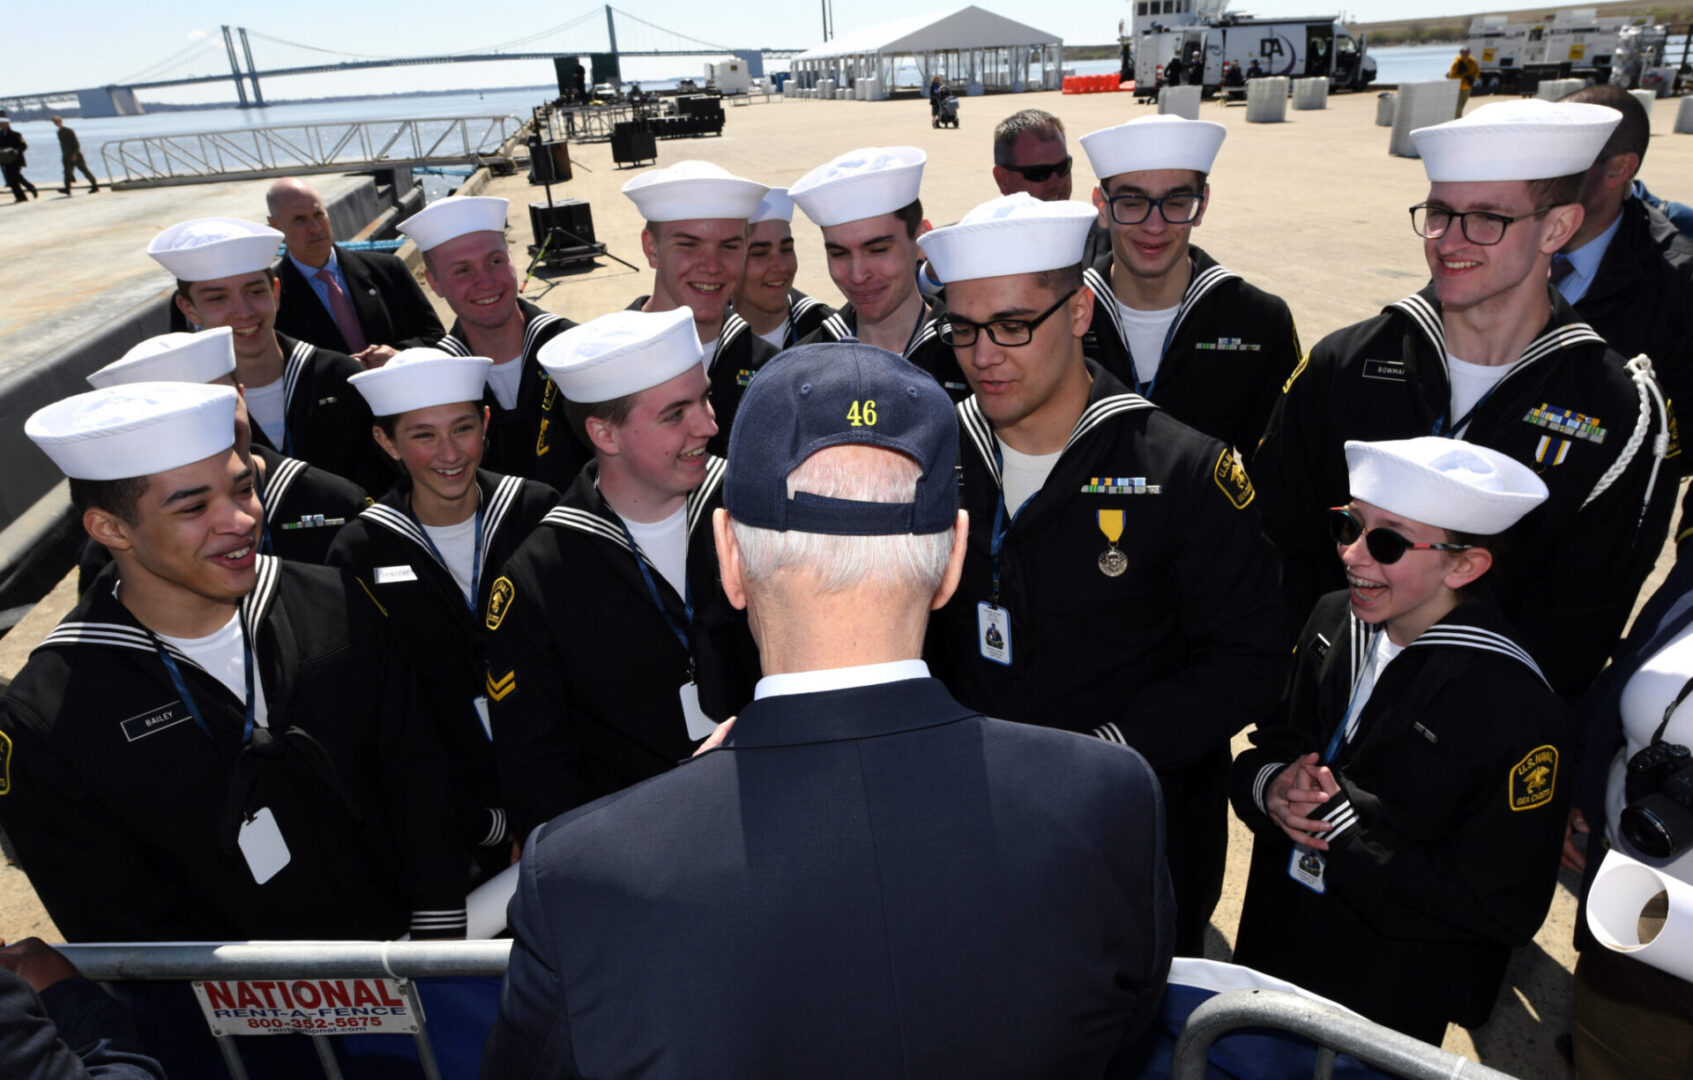 220402-N-GR655-1142 WILMINGTON, Delaware (April 2, 2022) – President of the United States Joe Biden speaks with Sea Cadets following a following a commissioning commemoration ceremony for the Virginia-class submarine USS Delaware (SSN 791) in Wilmington, Delaware April 2, 2022. The initial commissioning took place administratively in April 2020 due to COVID restrictions at the time and is the first submarine to be commissioned while submerged. Delaware, the seventh U.S Navy ship and first submarine named after the first U.S. state of Delaware, is a flexible, multi-mission platform designed to carry out the seven core competencies of the submarine force: anti-submarine warfare; anti-surface warfare; delivery of special operations forces; strike warfare; irregular warfare; intelligence, surveillance and reconnaissance; and mine warfare.  (U.S. Navy photo by Chief Petty Officer Joshua Karsten)